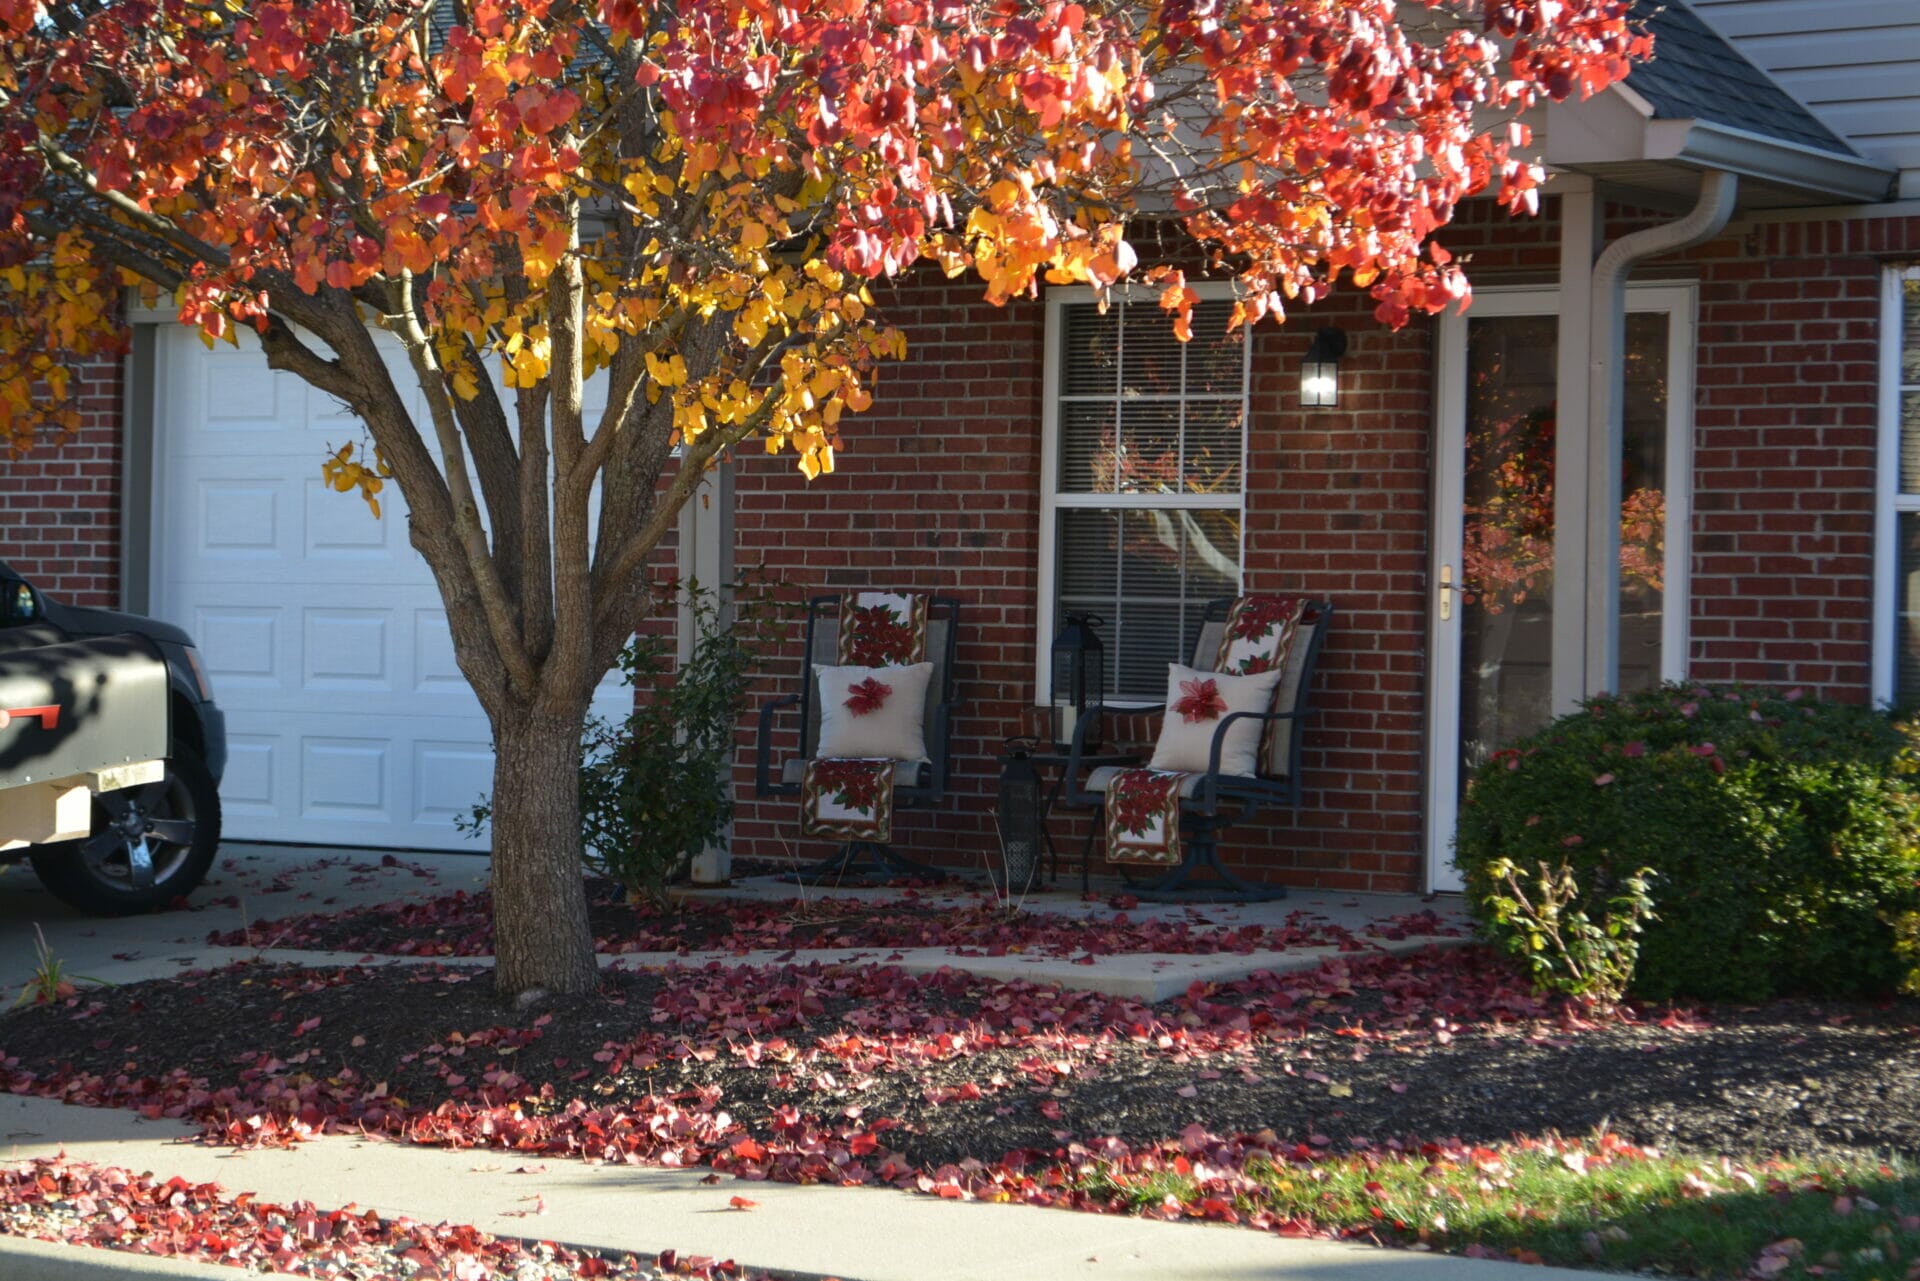 <span  class="uc_style_uc_tiles_grid_image_elementor_uc_items_attribute_title" style="color:#000000;">Rosegate Assisted Living Garden Home porch with two chairs during the fall</span>